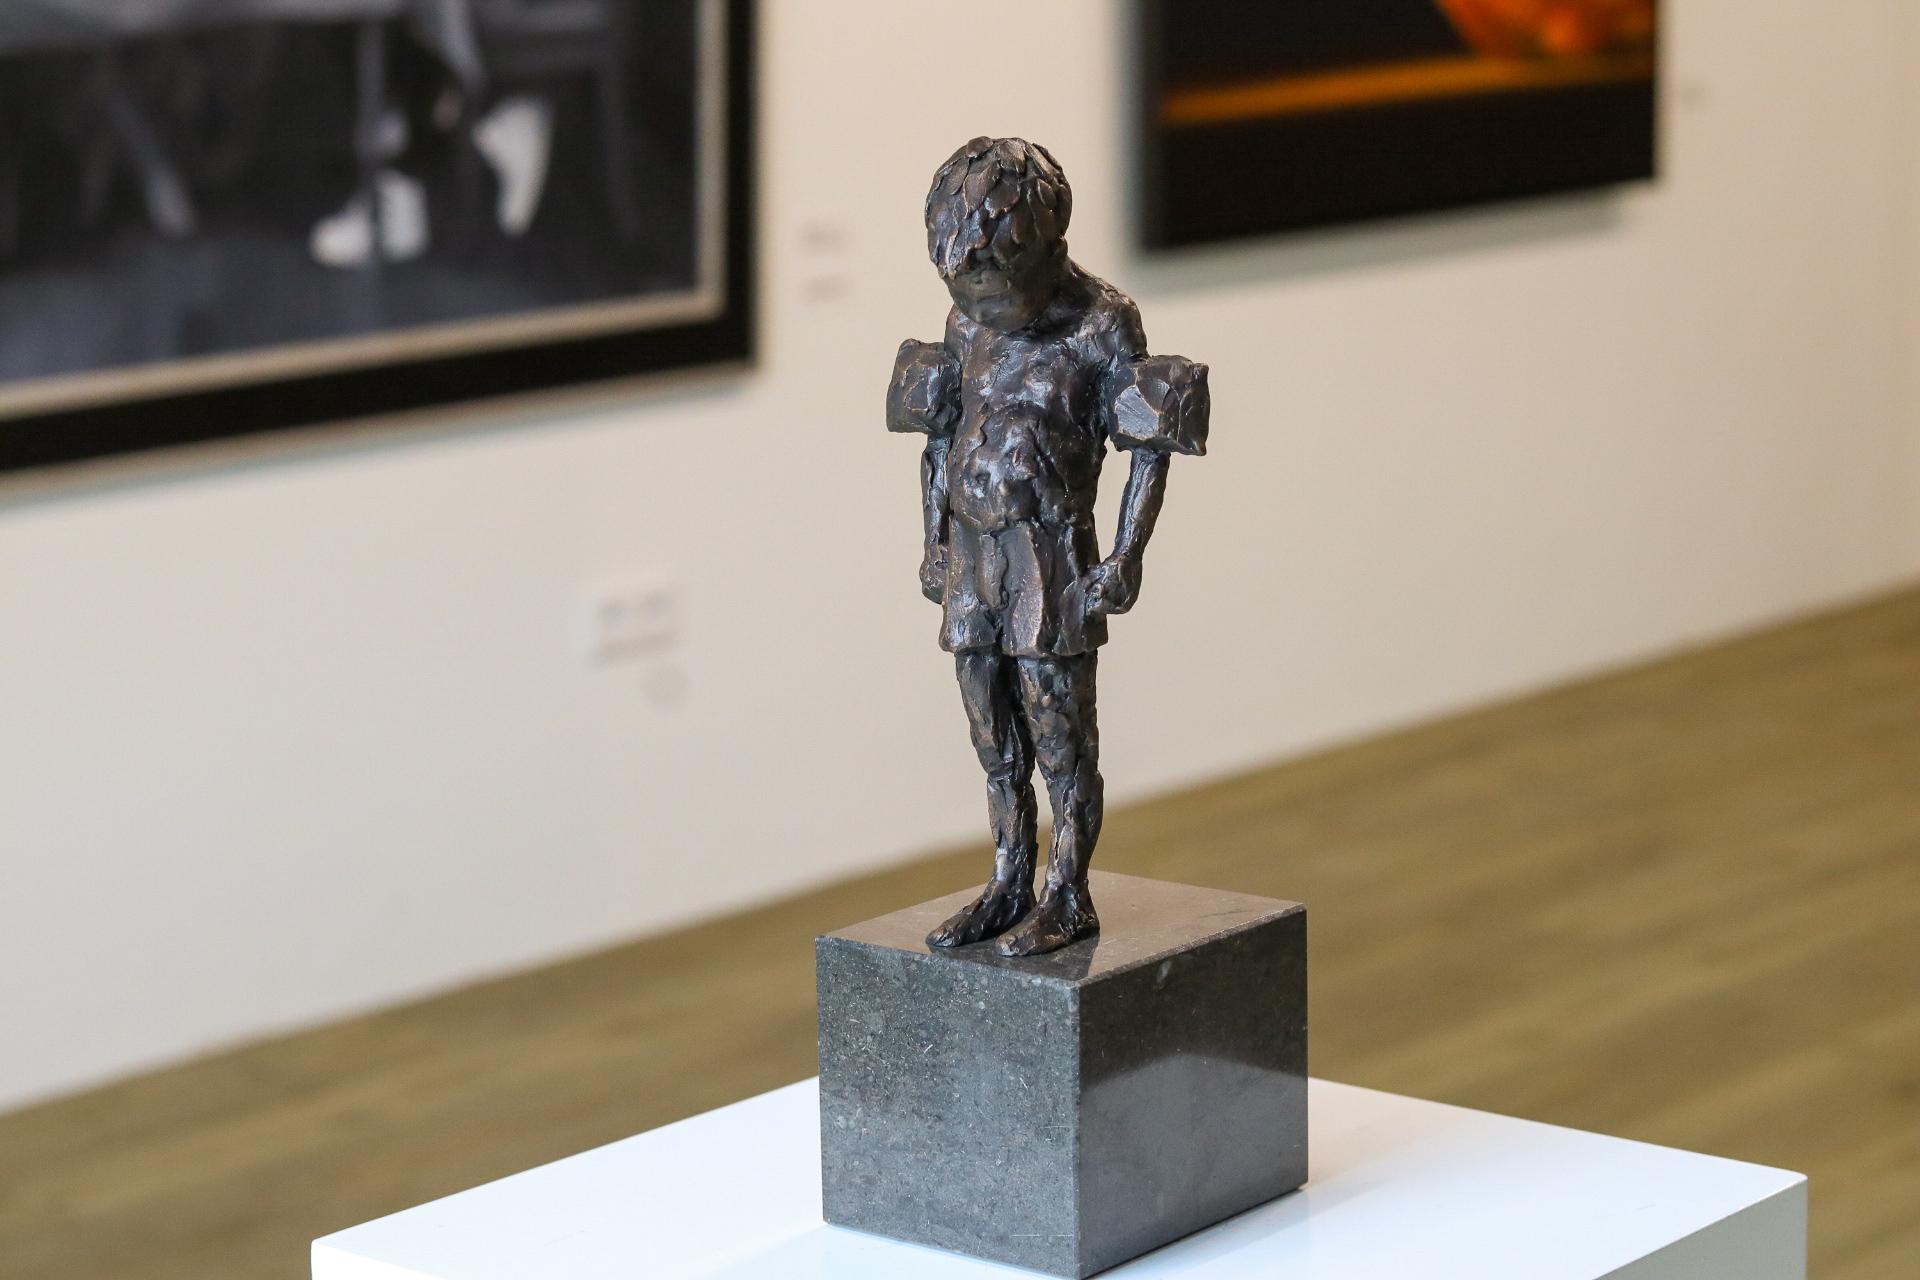 Mieke Heitling Figurative Sculpture - Swimming Lessons - 21st Century Contemporary Bronze Sculpture of a Little Boy